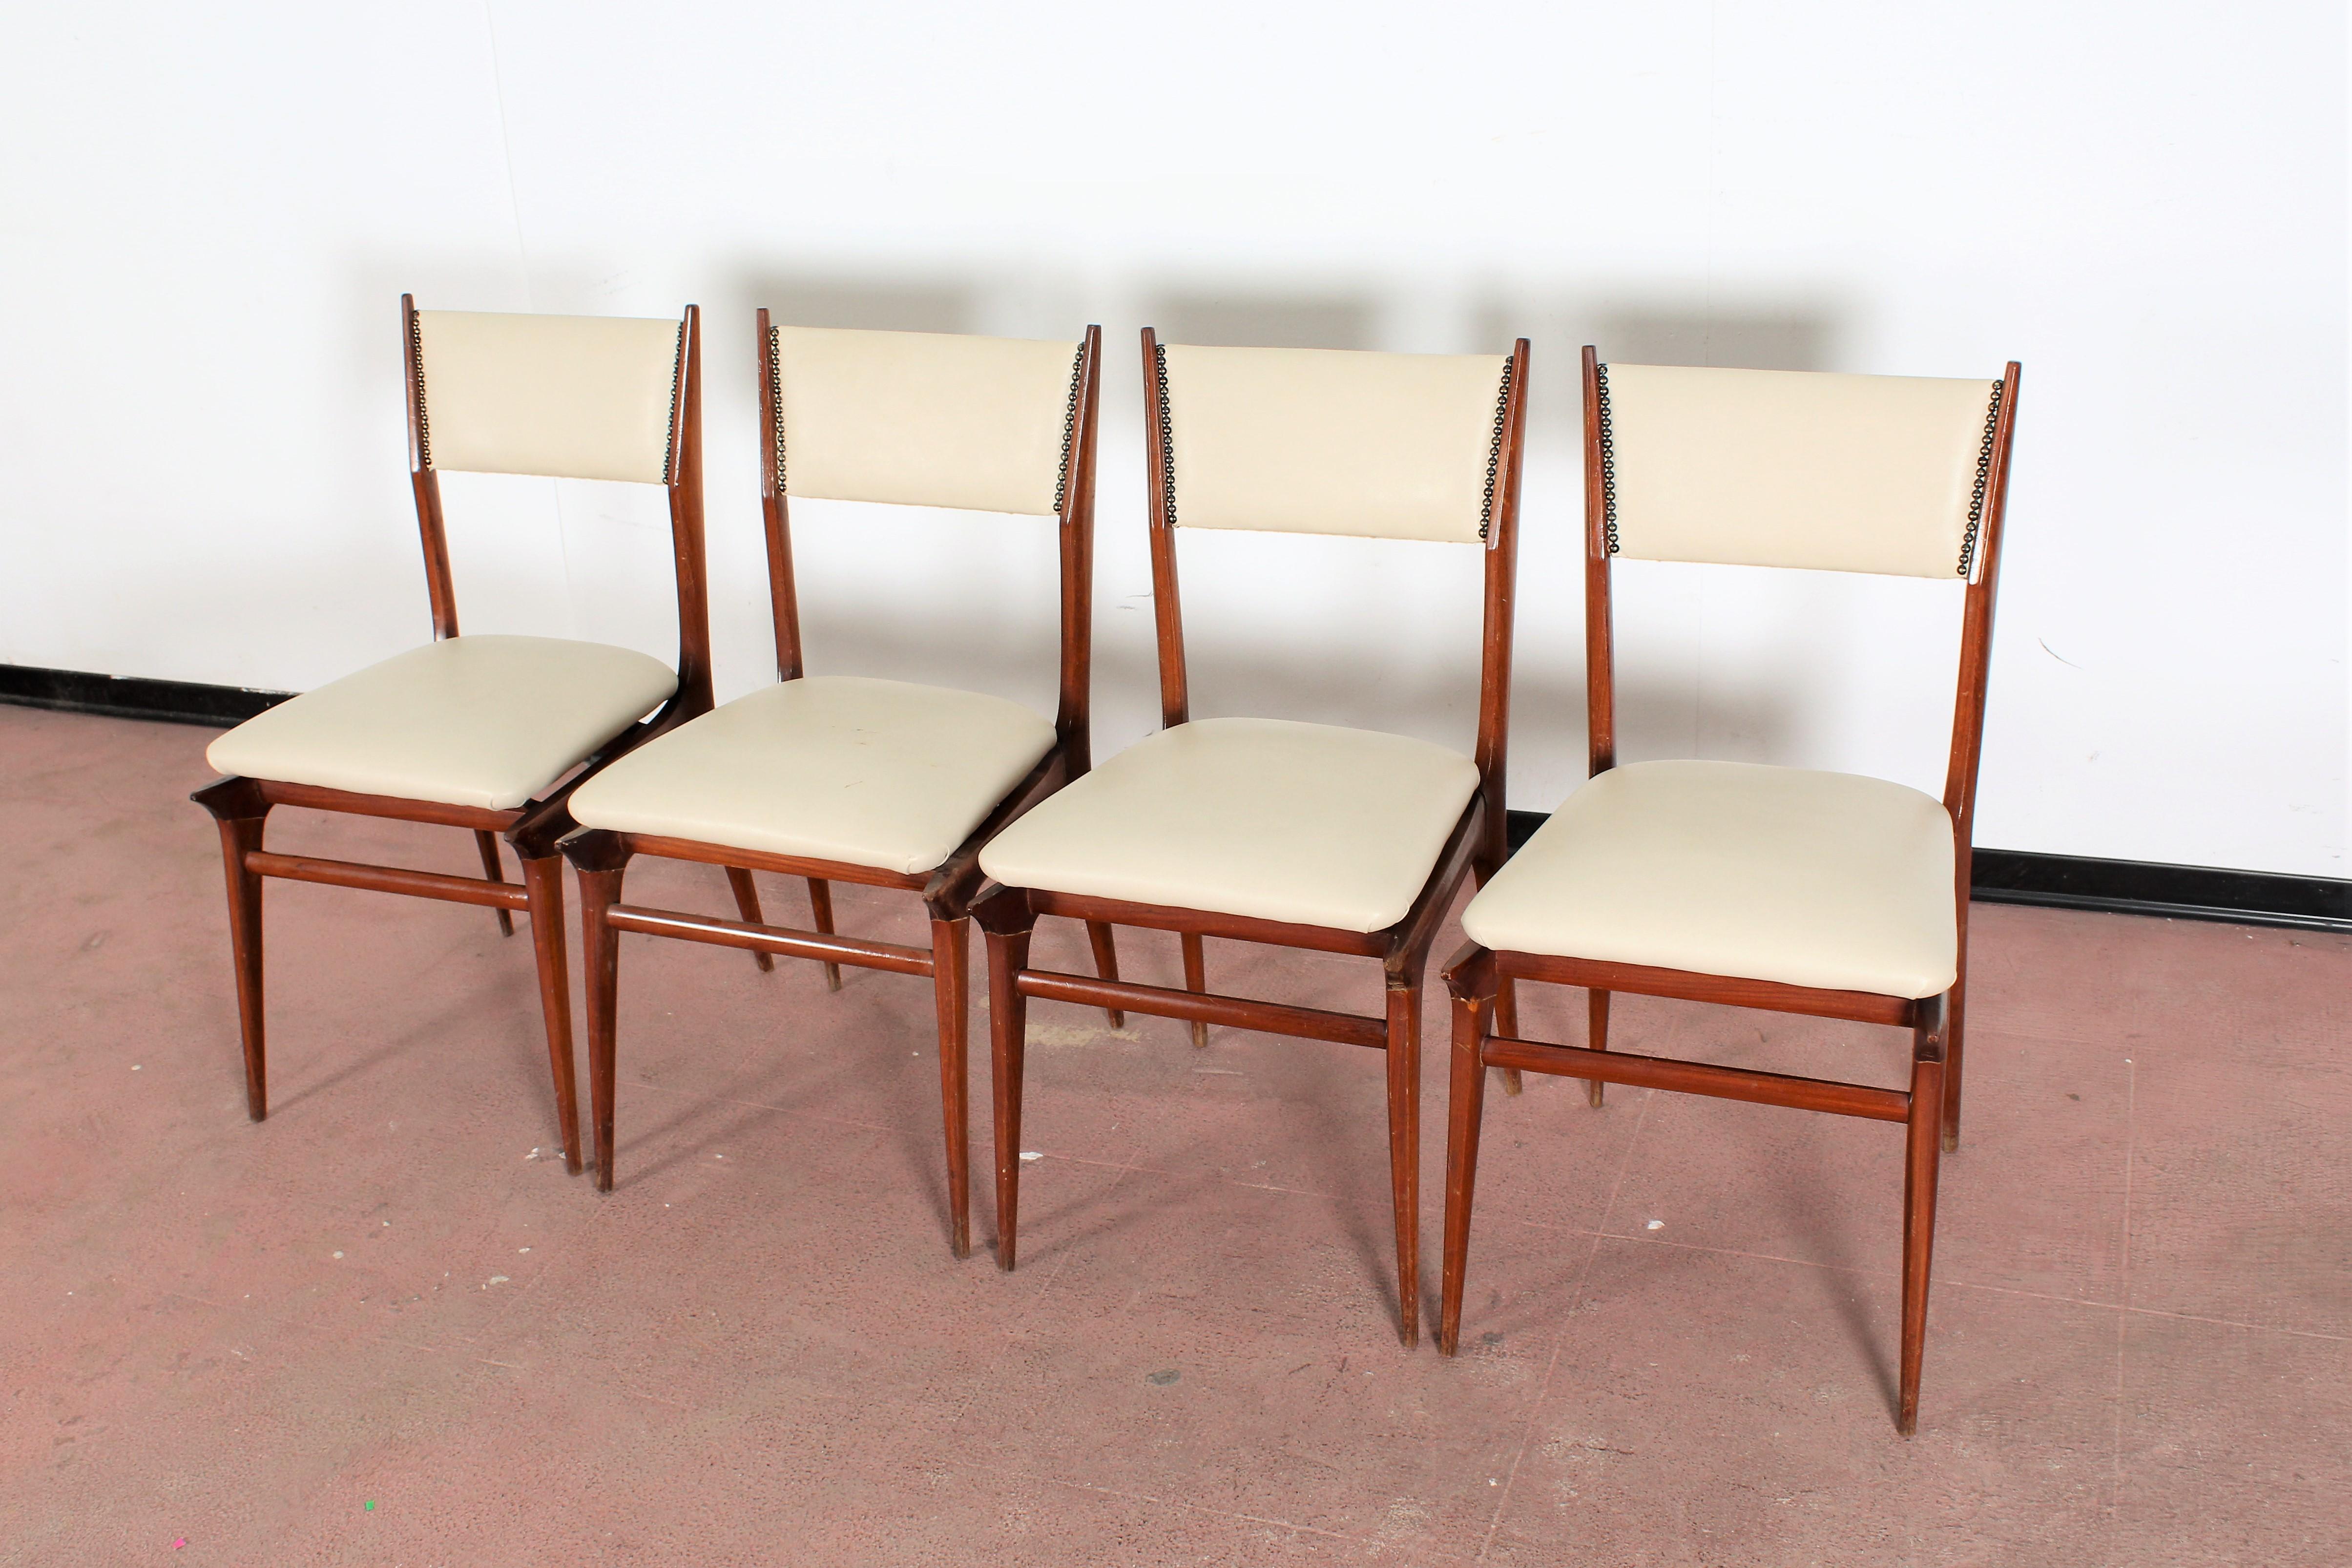 Mid-Century Modern Midcentury Wood and Leatherette Chairs Carlo de Carli Italy 1950s Set of 4